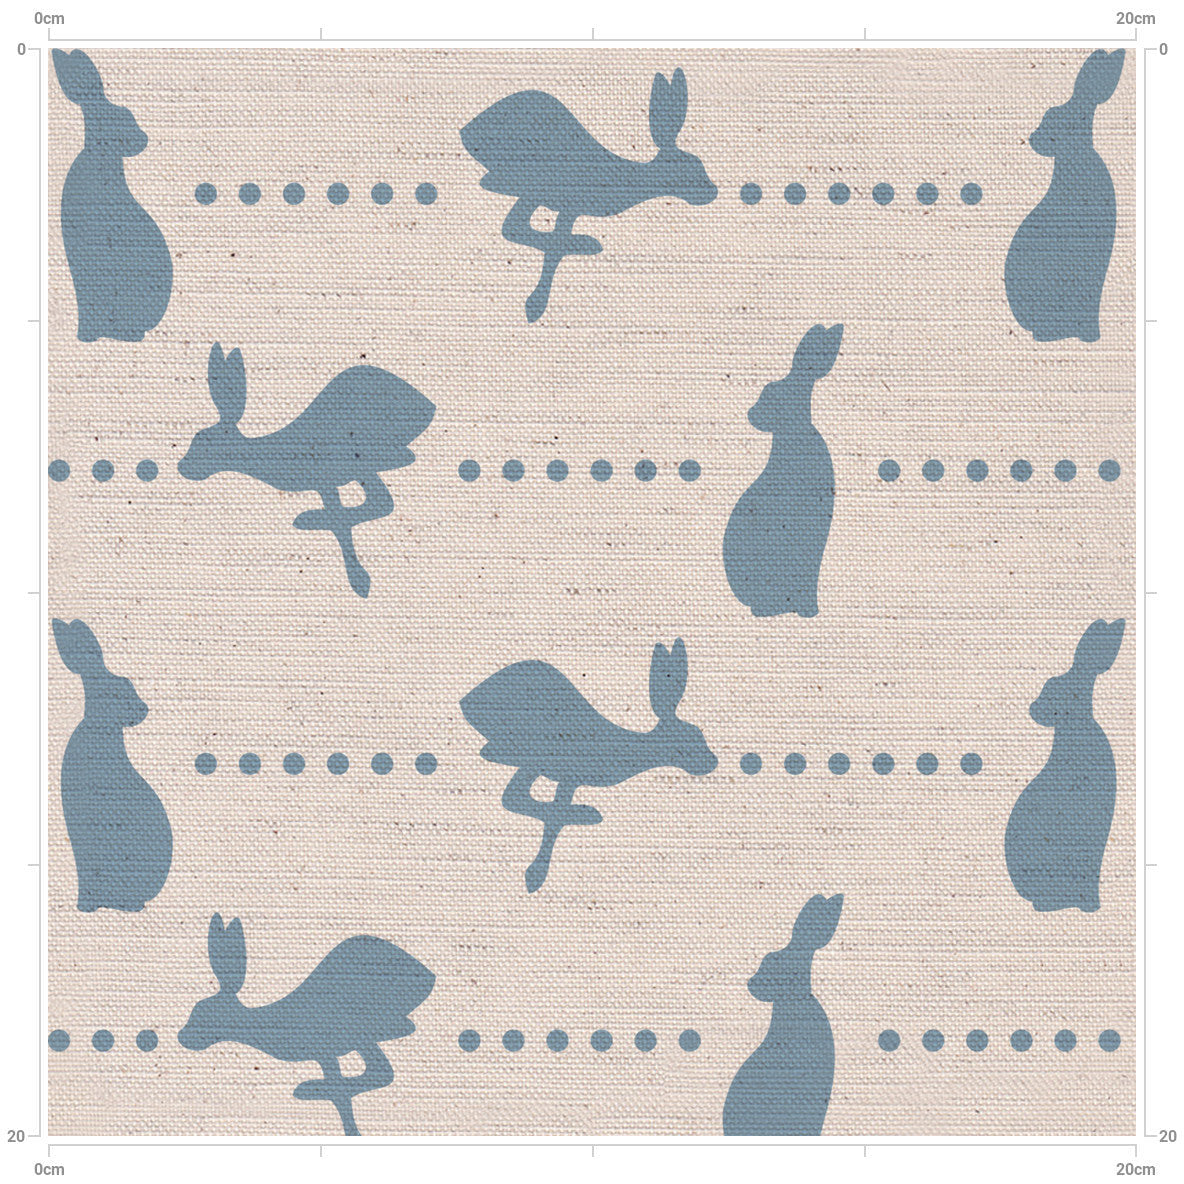 Blue Hare and Dots print linen fabric featuring running and sitting hares on a linen background with dots - designed by F&B and inspired by British country living